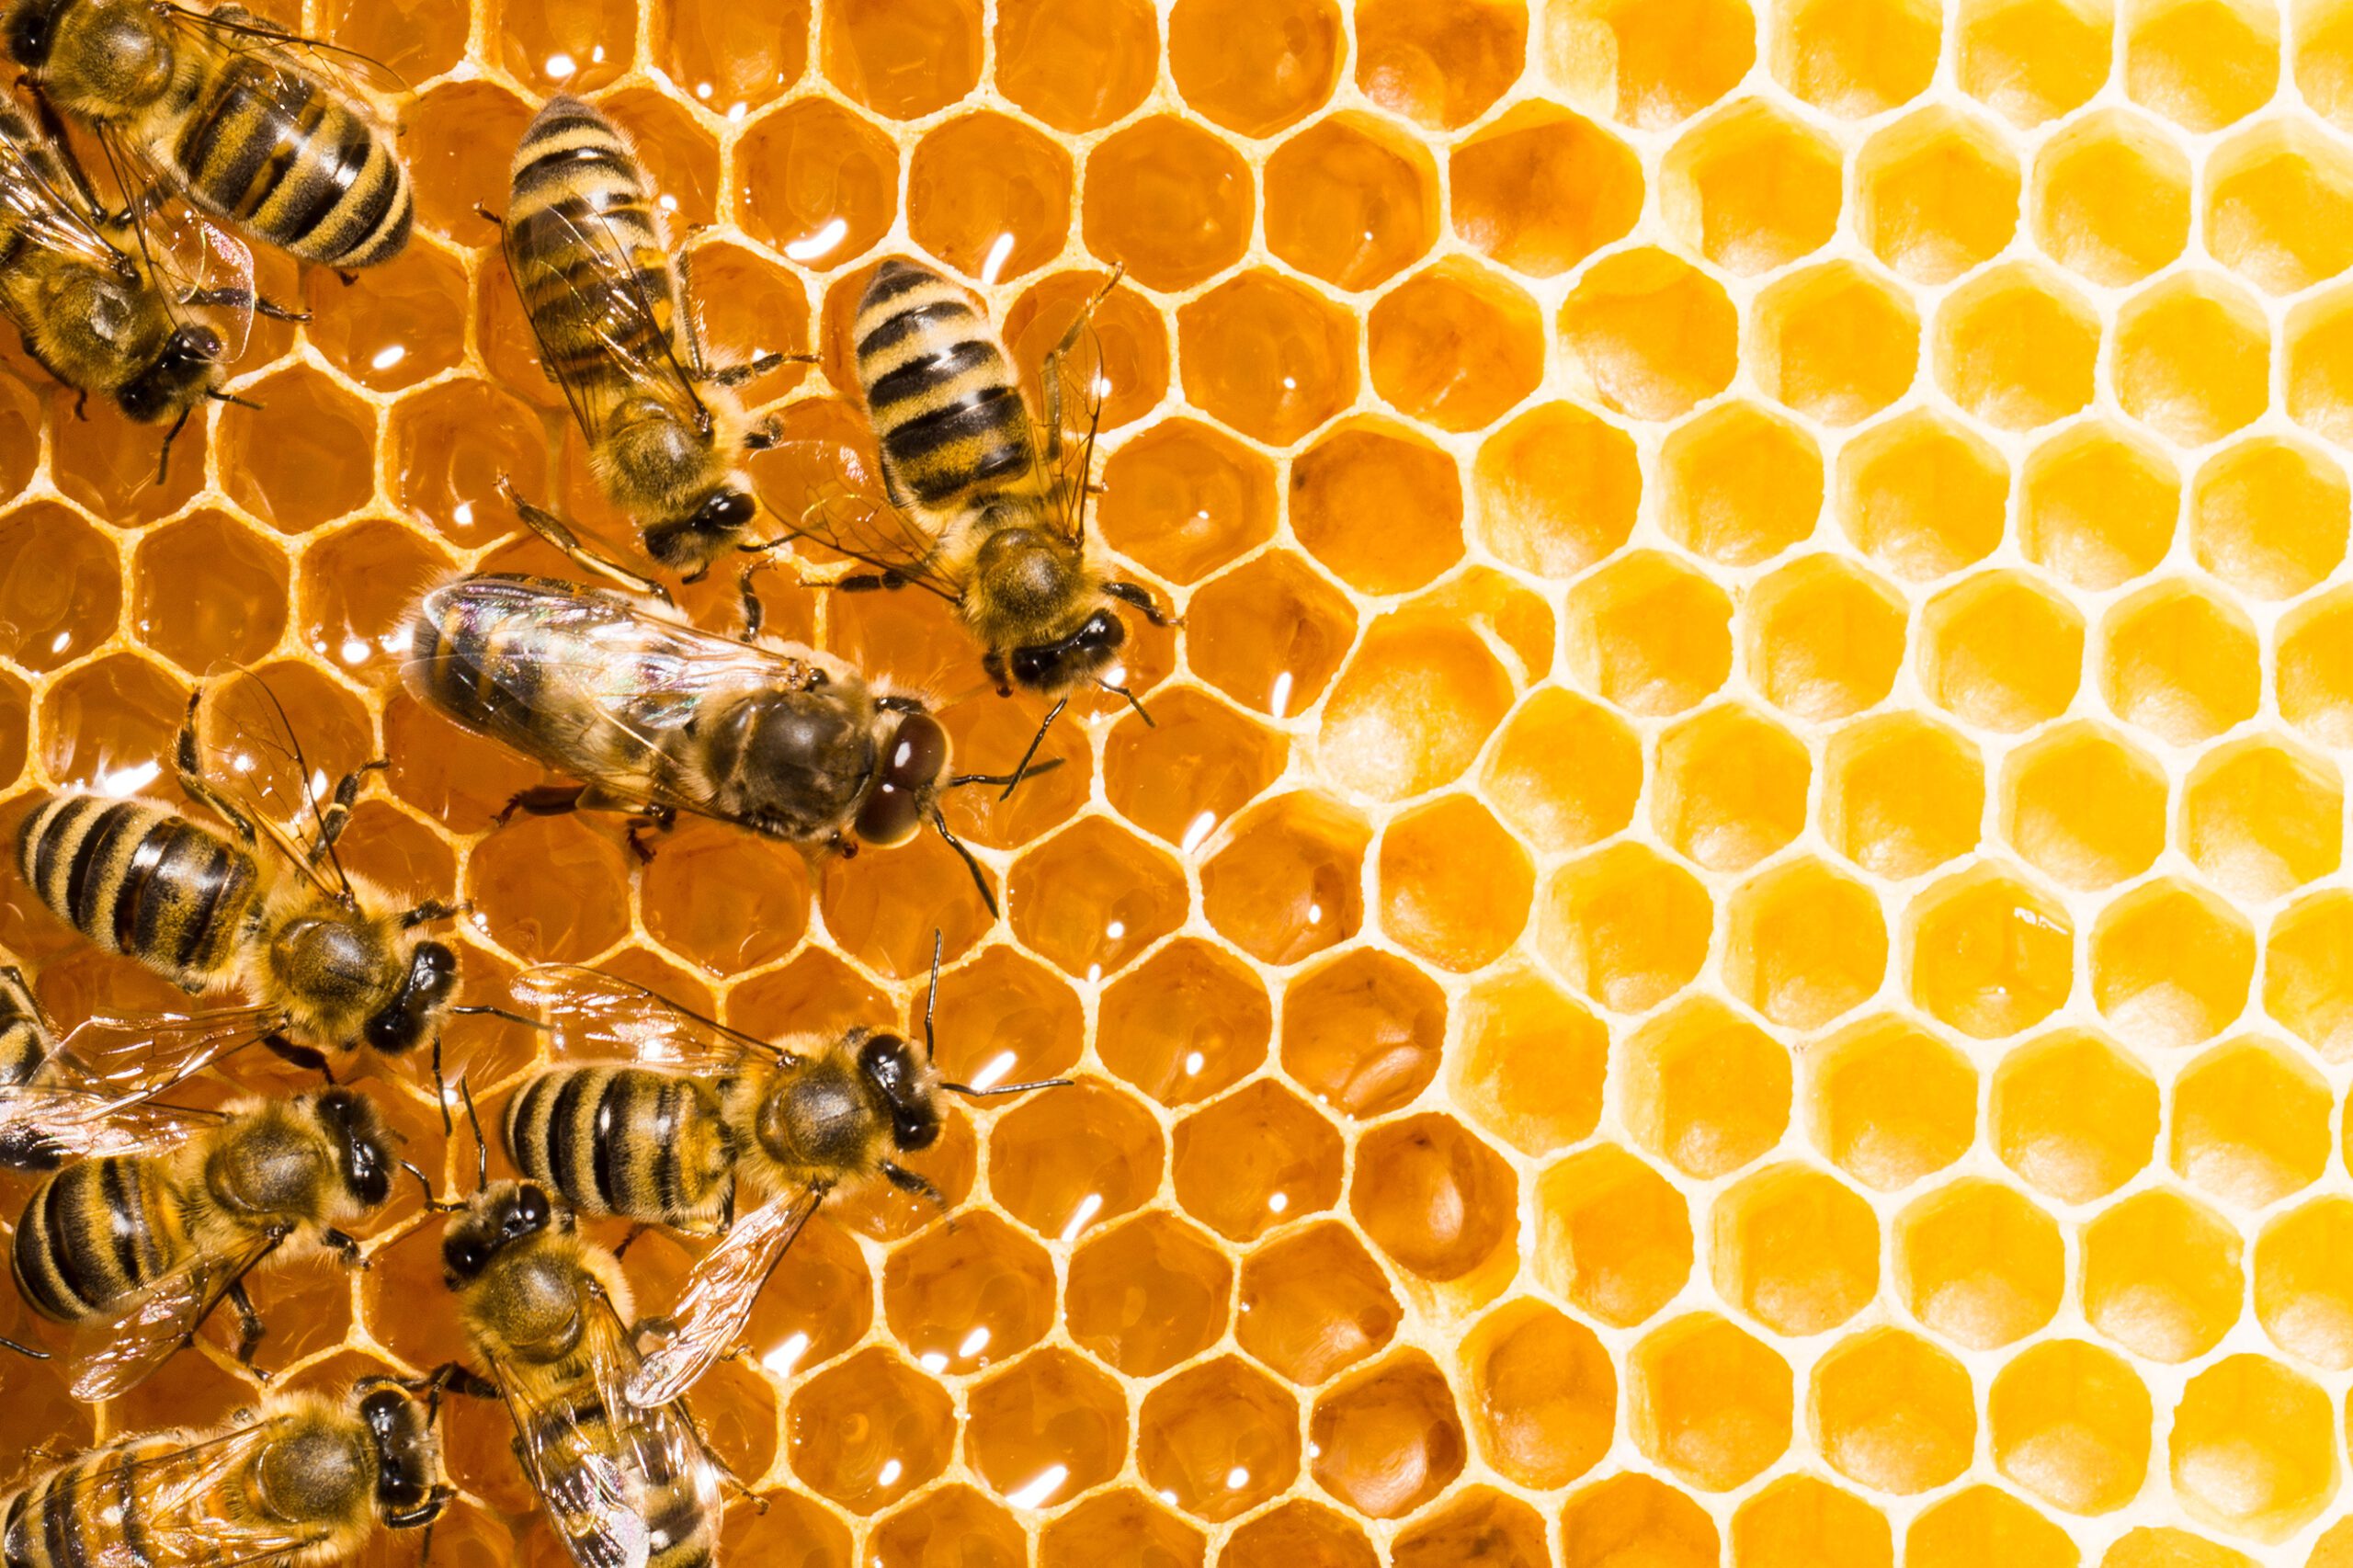 Close up view of the working bees on honeycells.